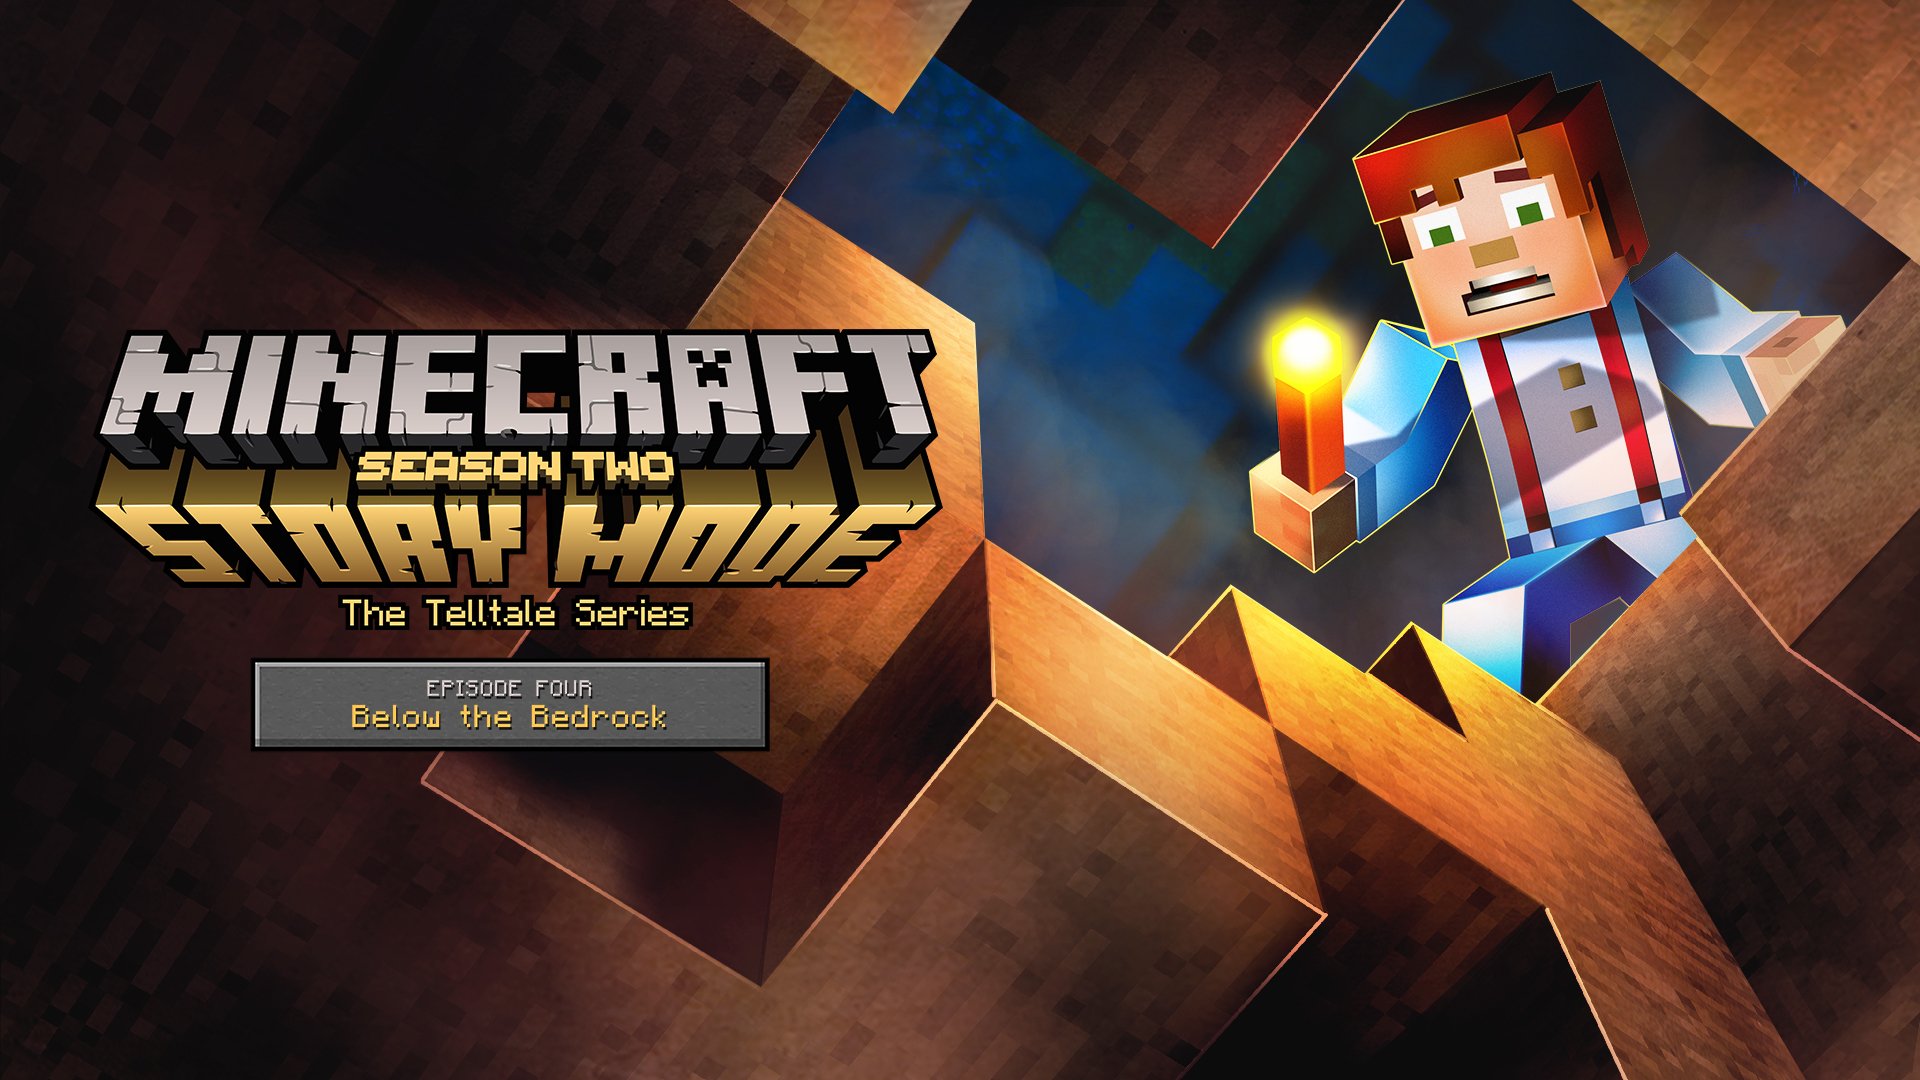 News - Now Available on Steam - Minecraft: Story Mode - Season Two